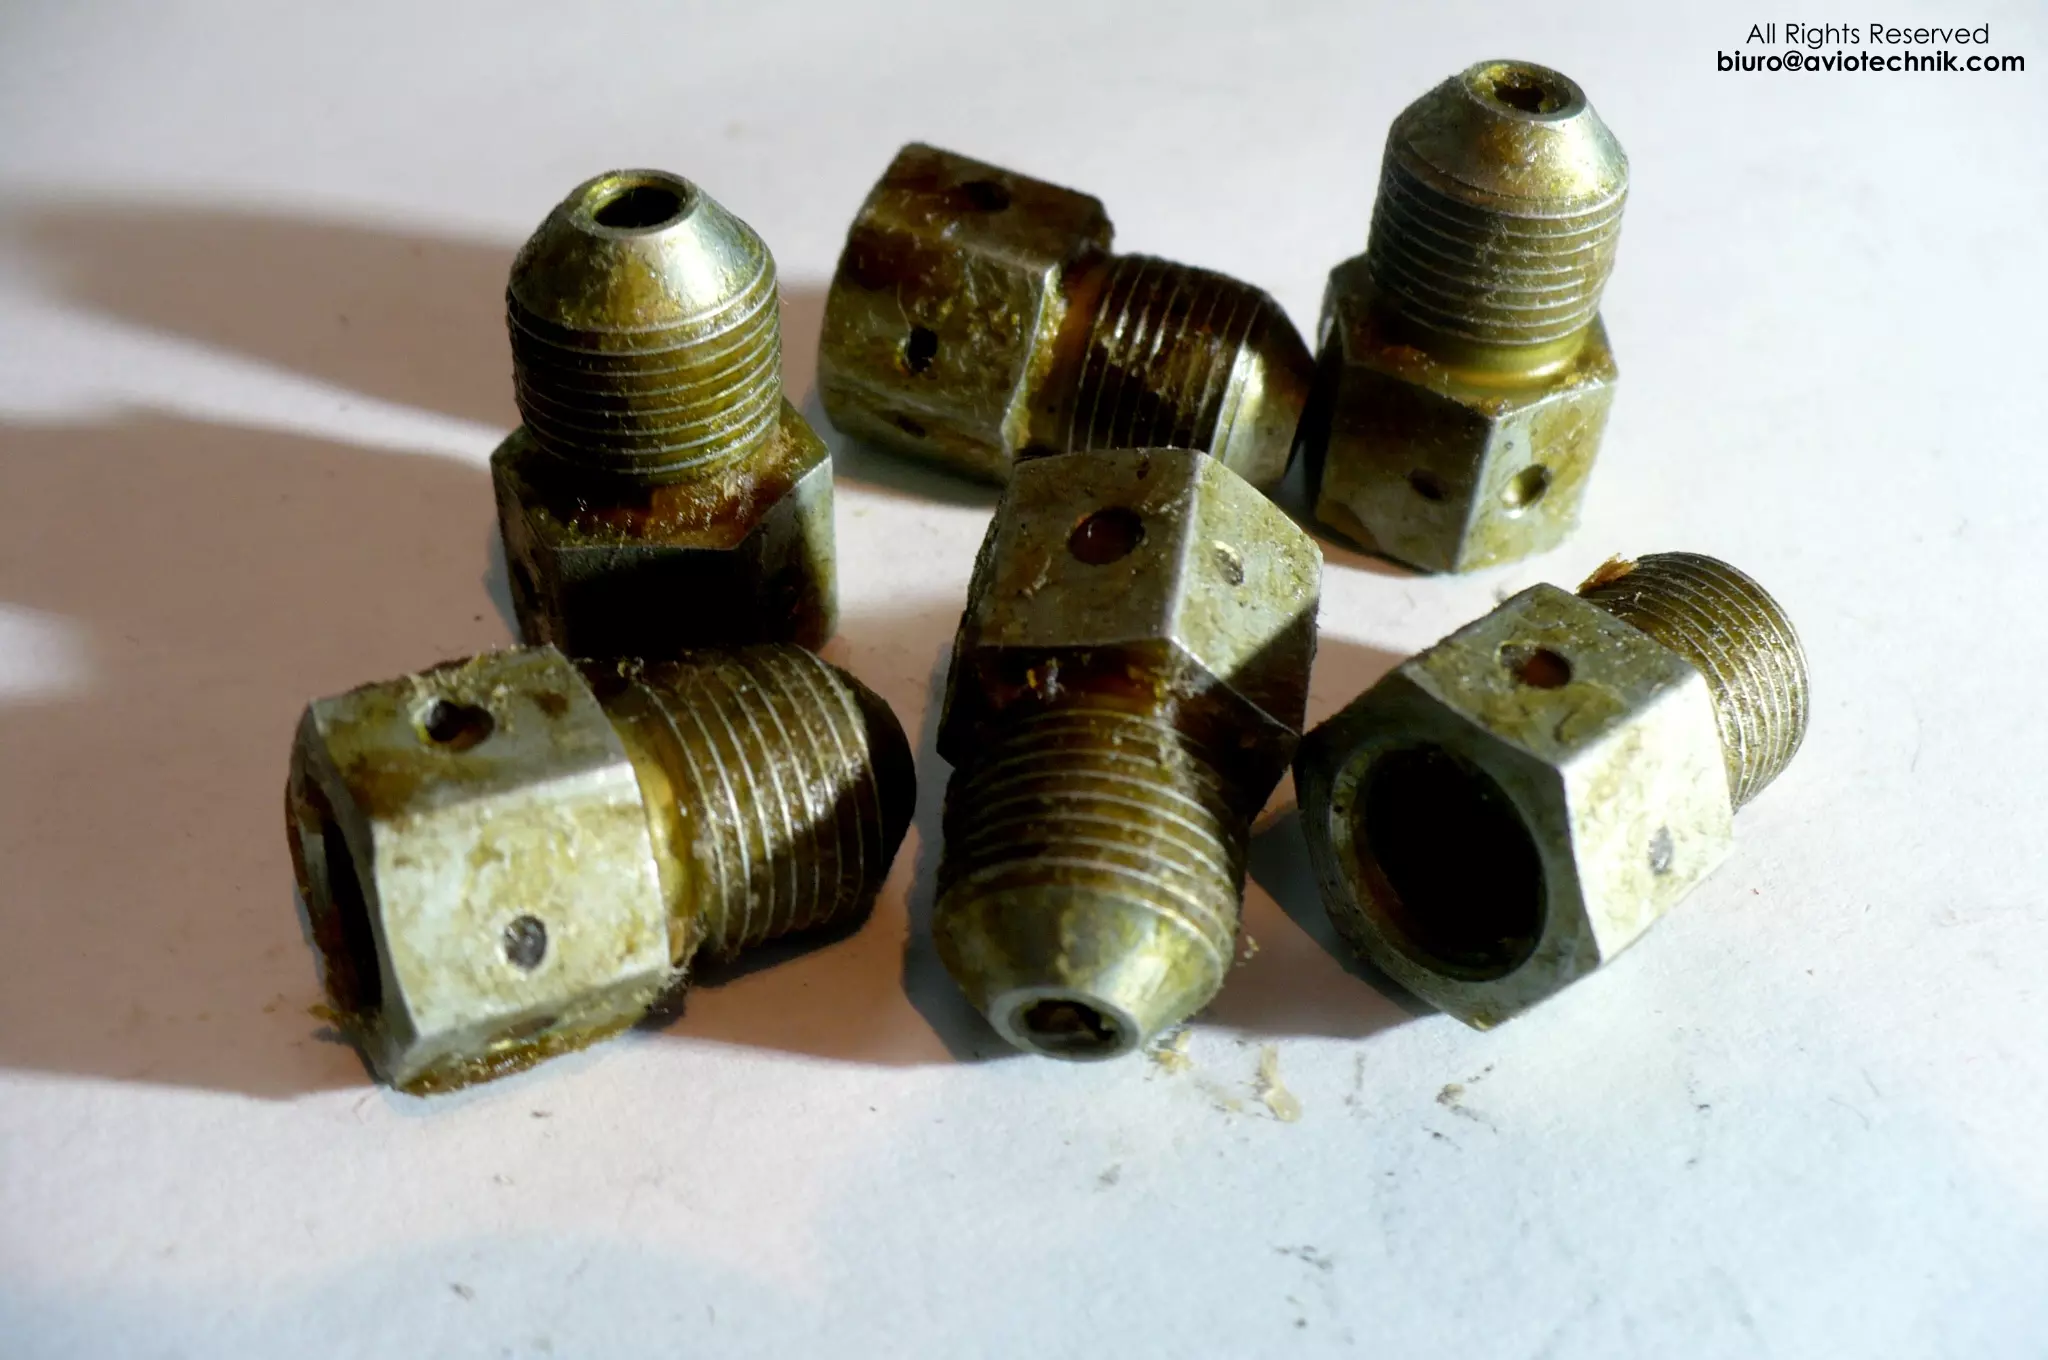 UPZL - 104 WILGA REDUCTION CONNECTOR CE 161004